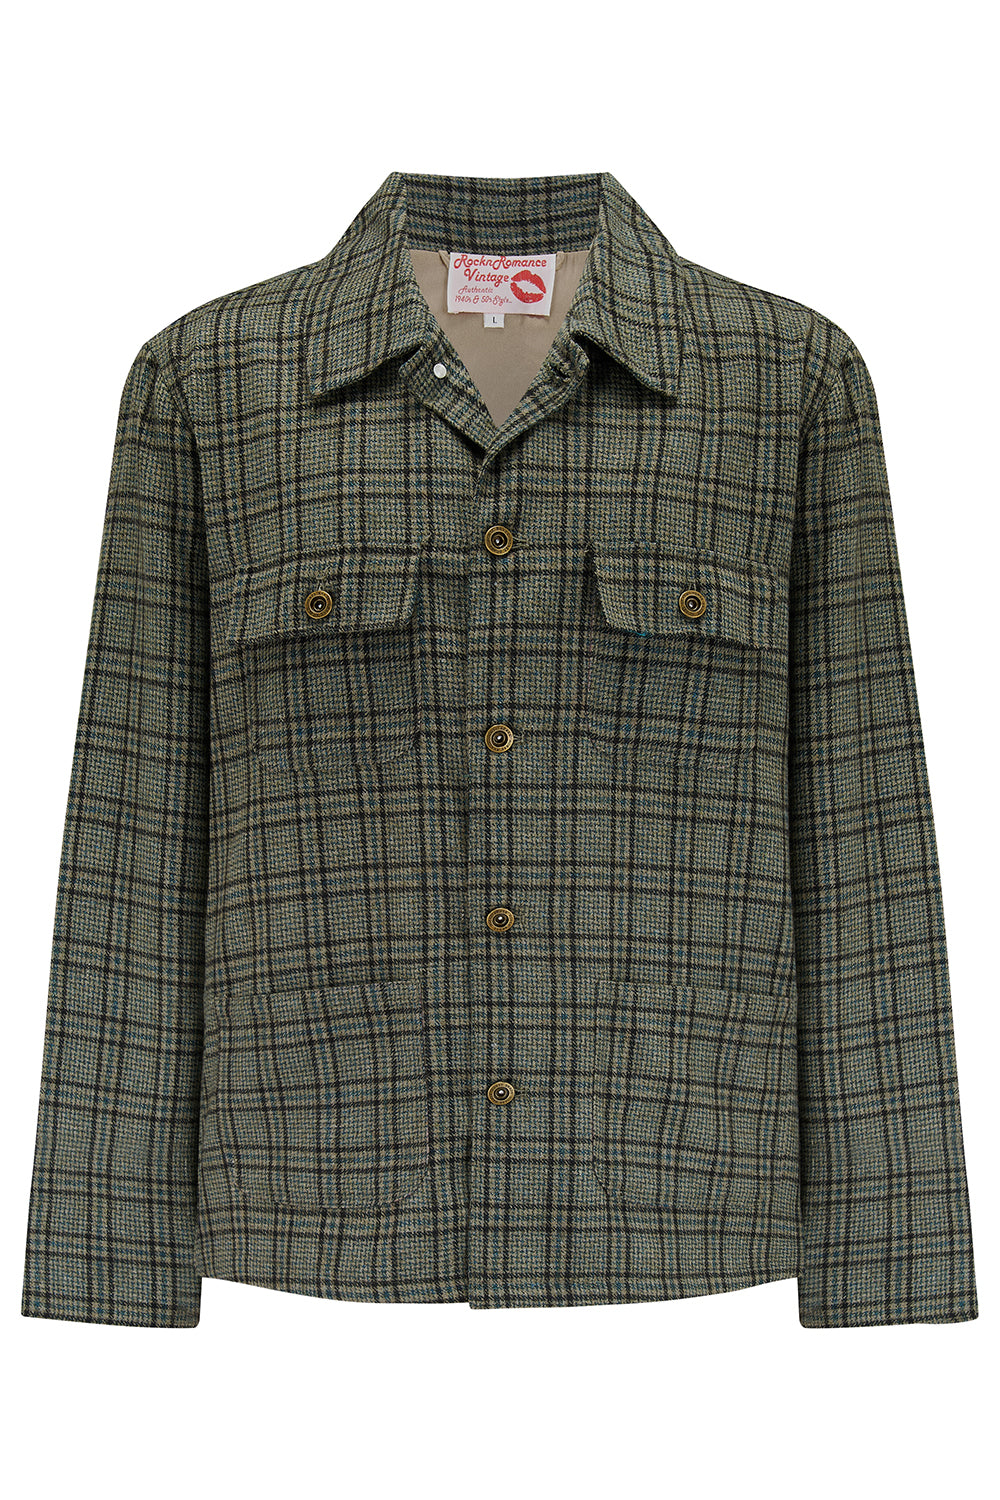 The "Bronson" Mens Chore Jacket In Grey/Brown Check, 100% Wool Outer .. 1950s Rockabilly Vintage Style